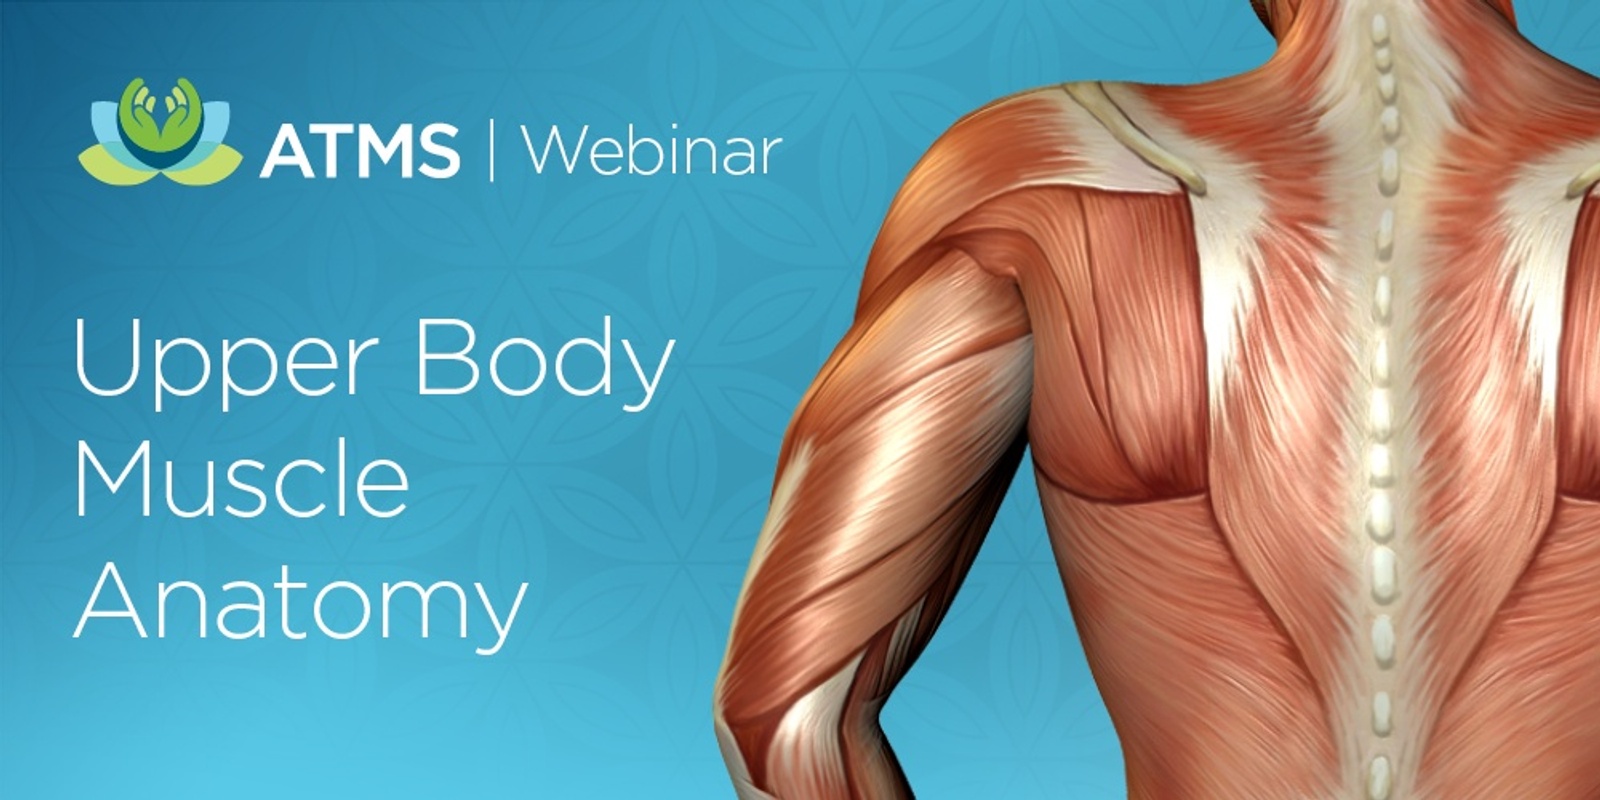 Webinar Recording: Anatomy Revision - Muscles of the Upper Body